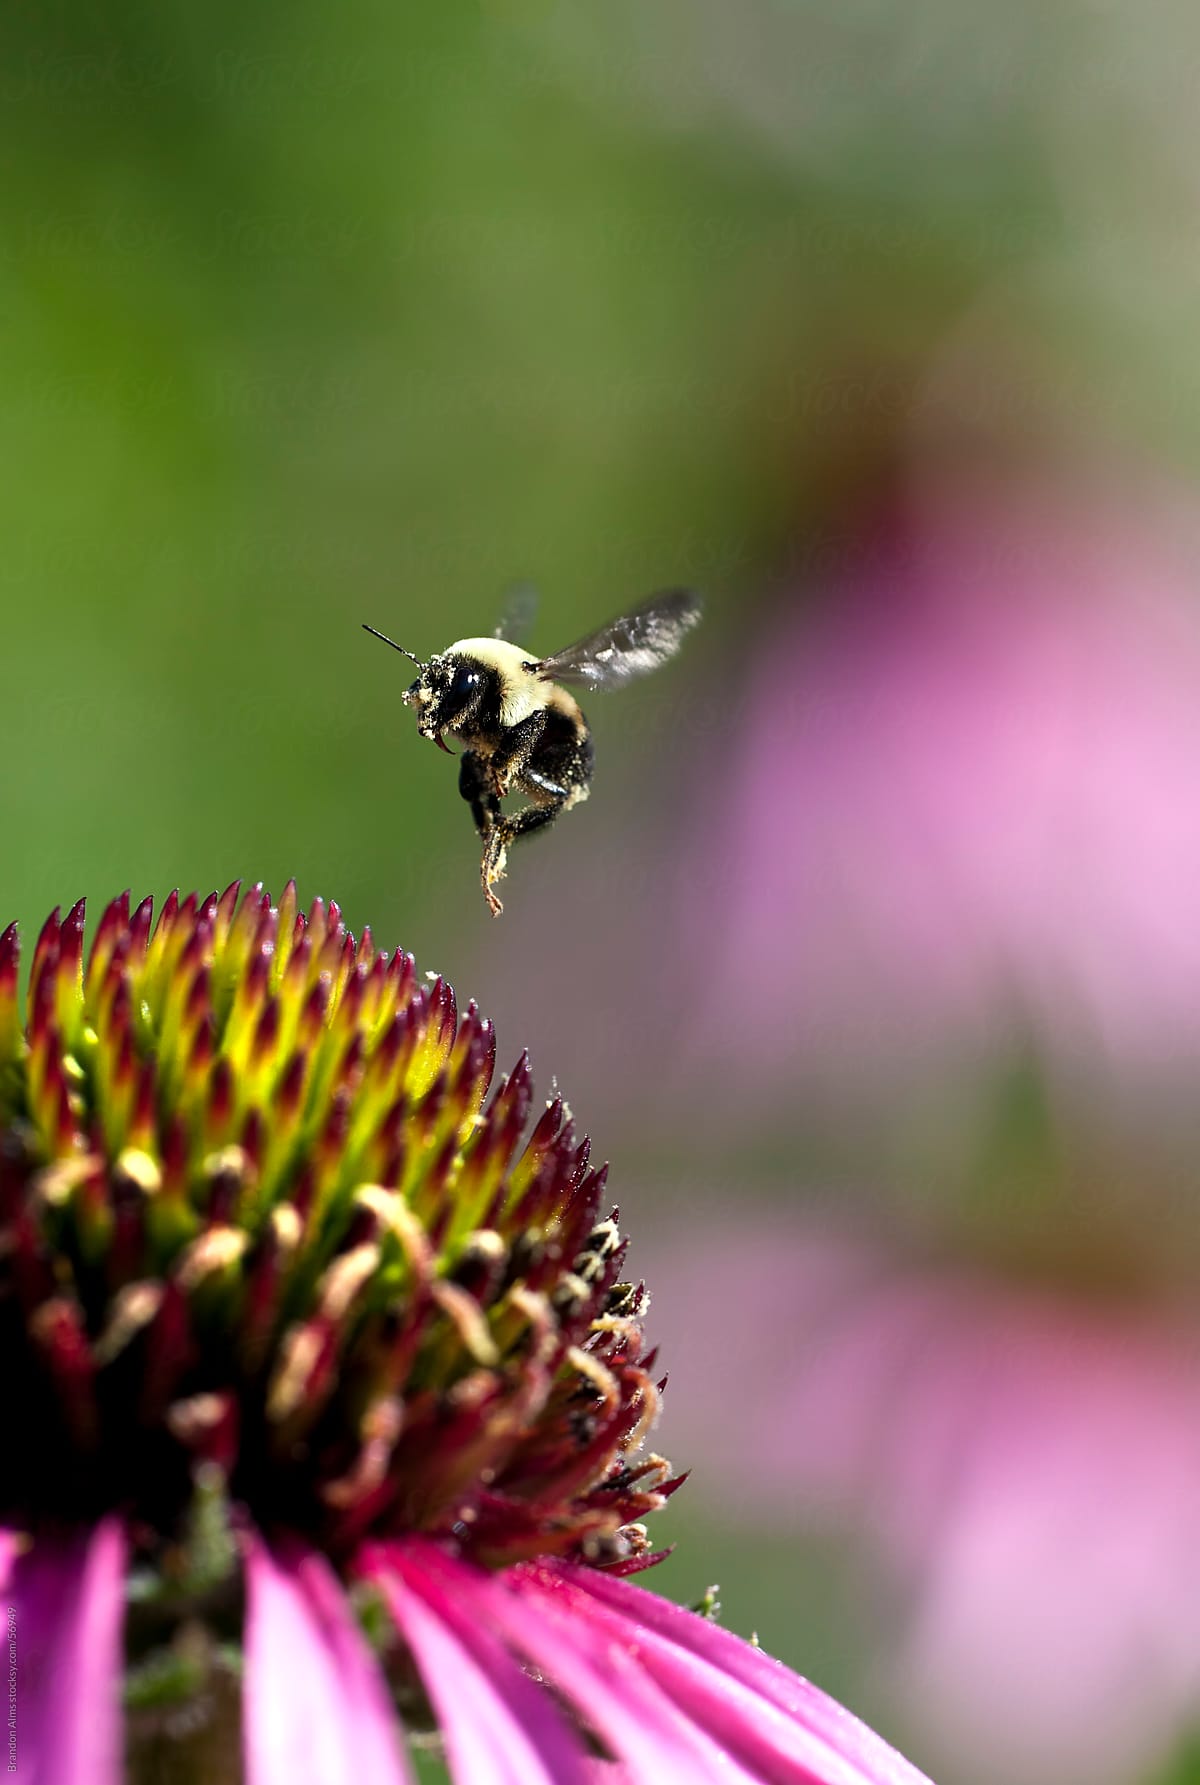 Bumblebee in Flight After Pollinating a Coneflower